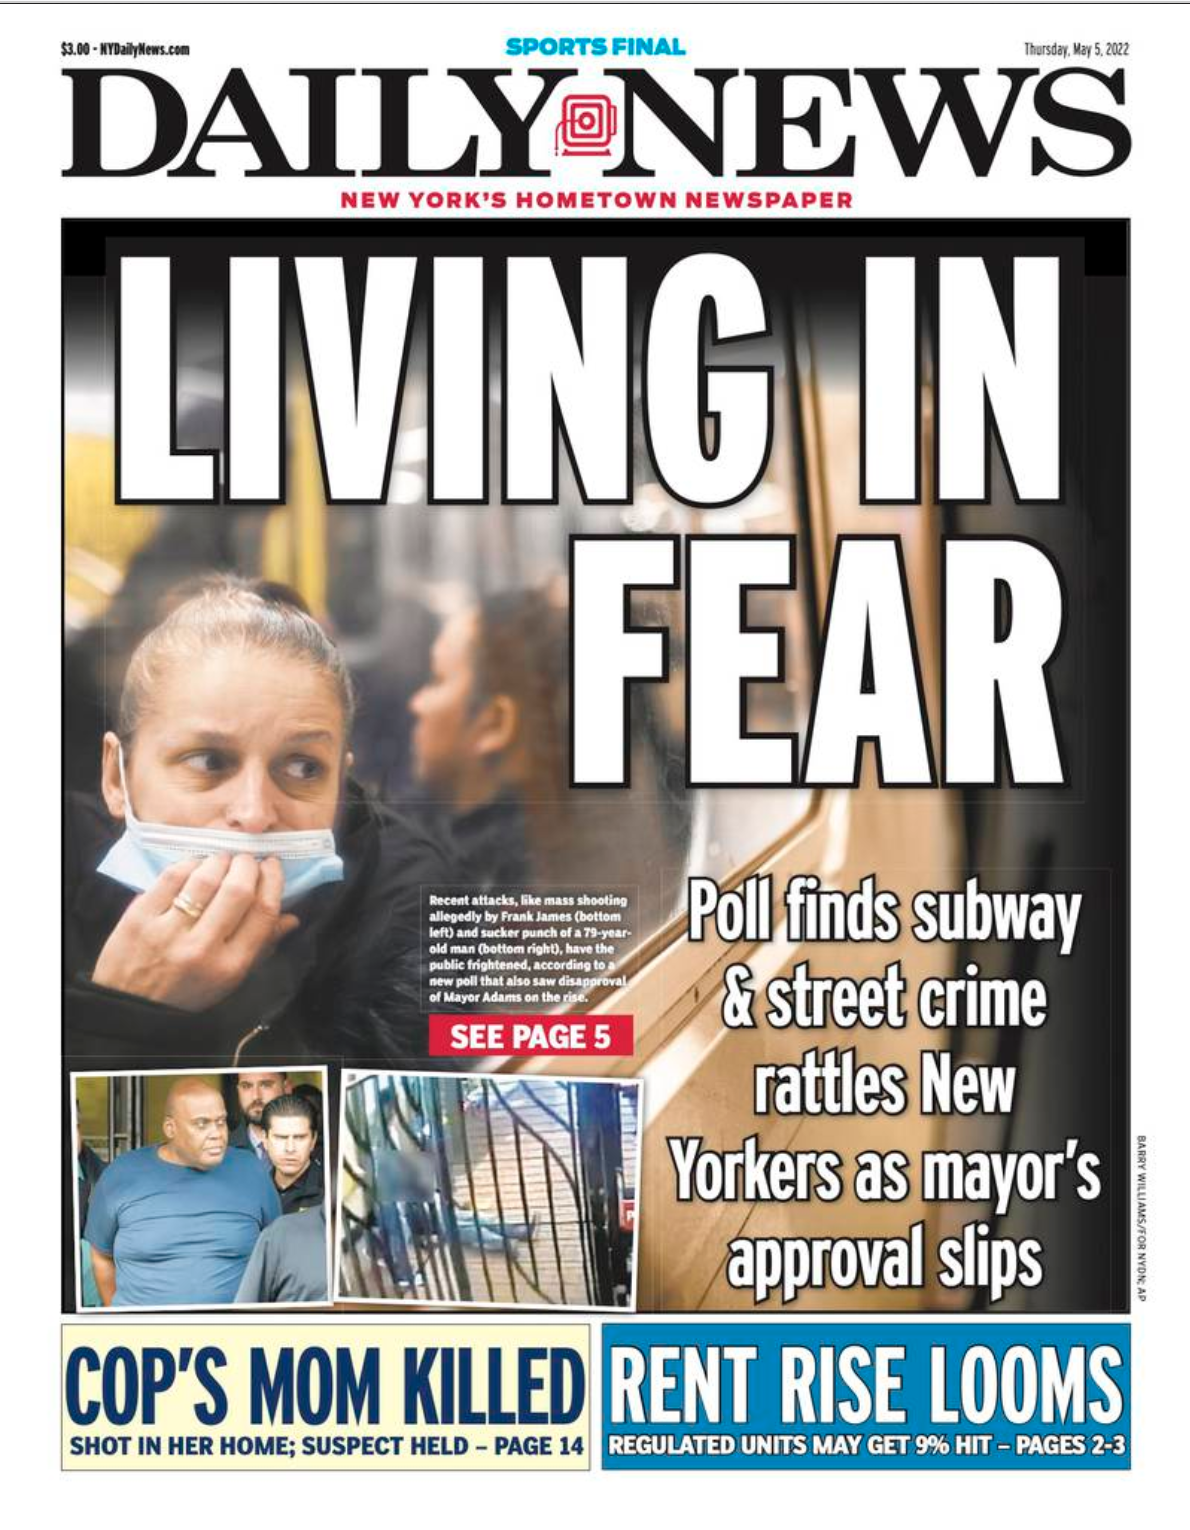 The May 5, 2022 Cover of the New York Daily News which reads in part "Living in Fear: Poll finds subway and street crime rattles New Yorkers as mayor's approval slips"